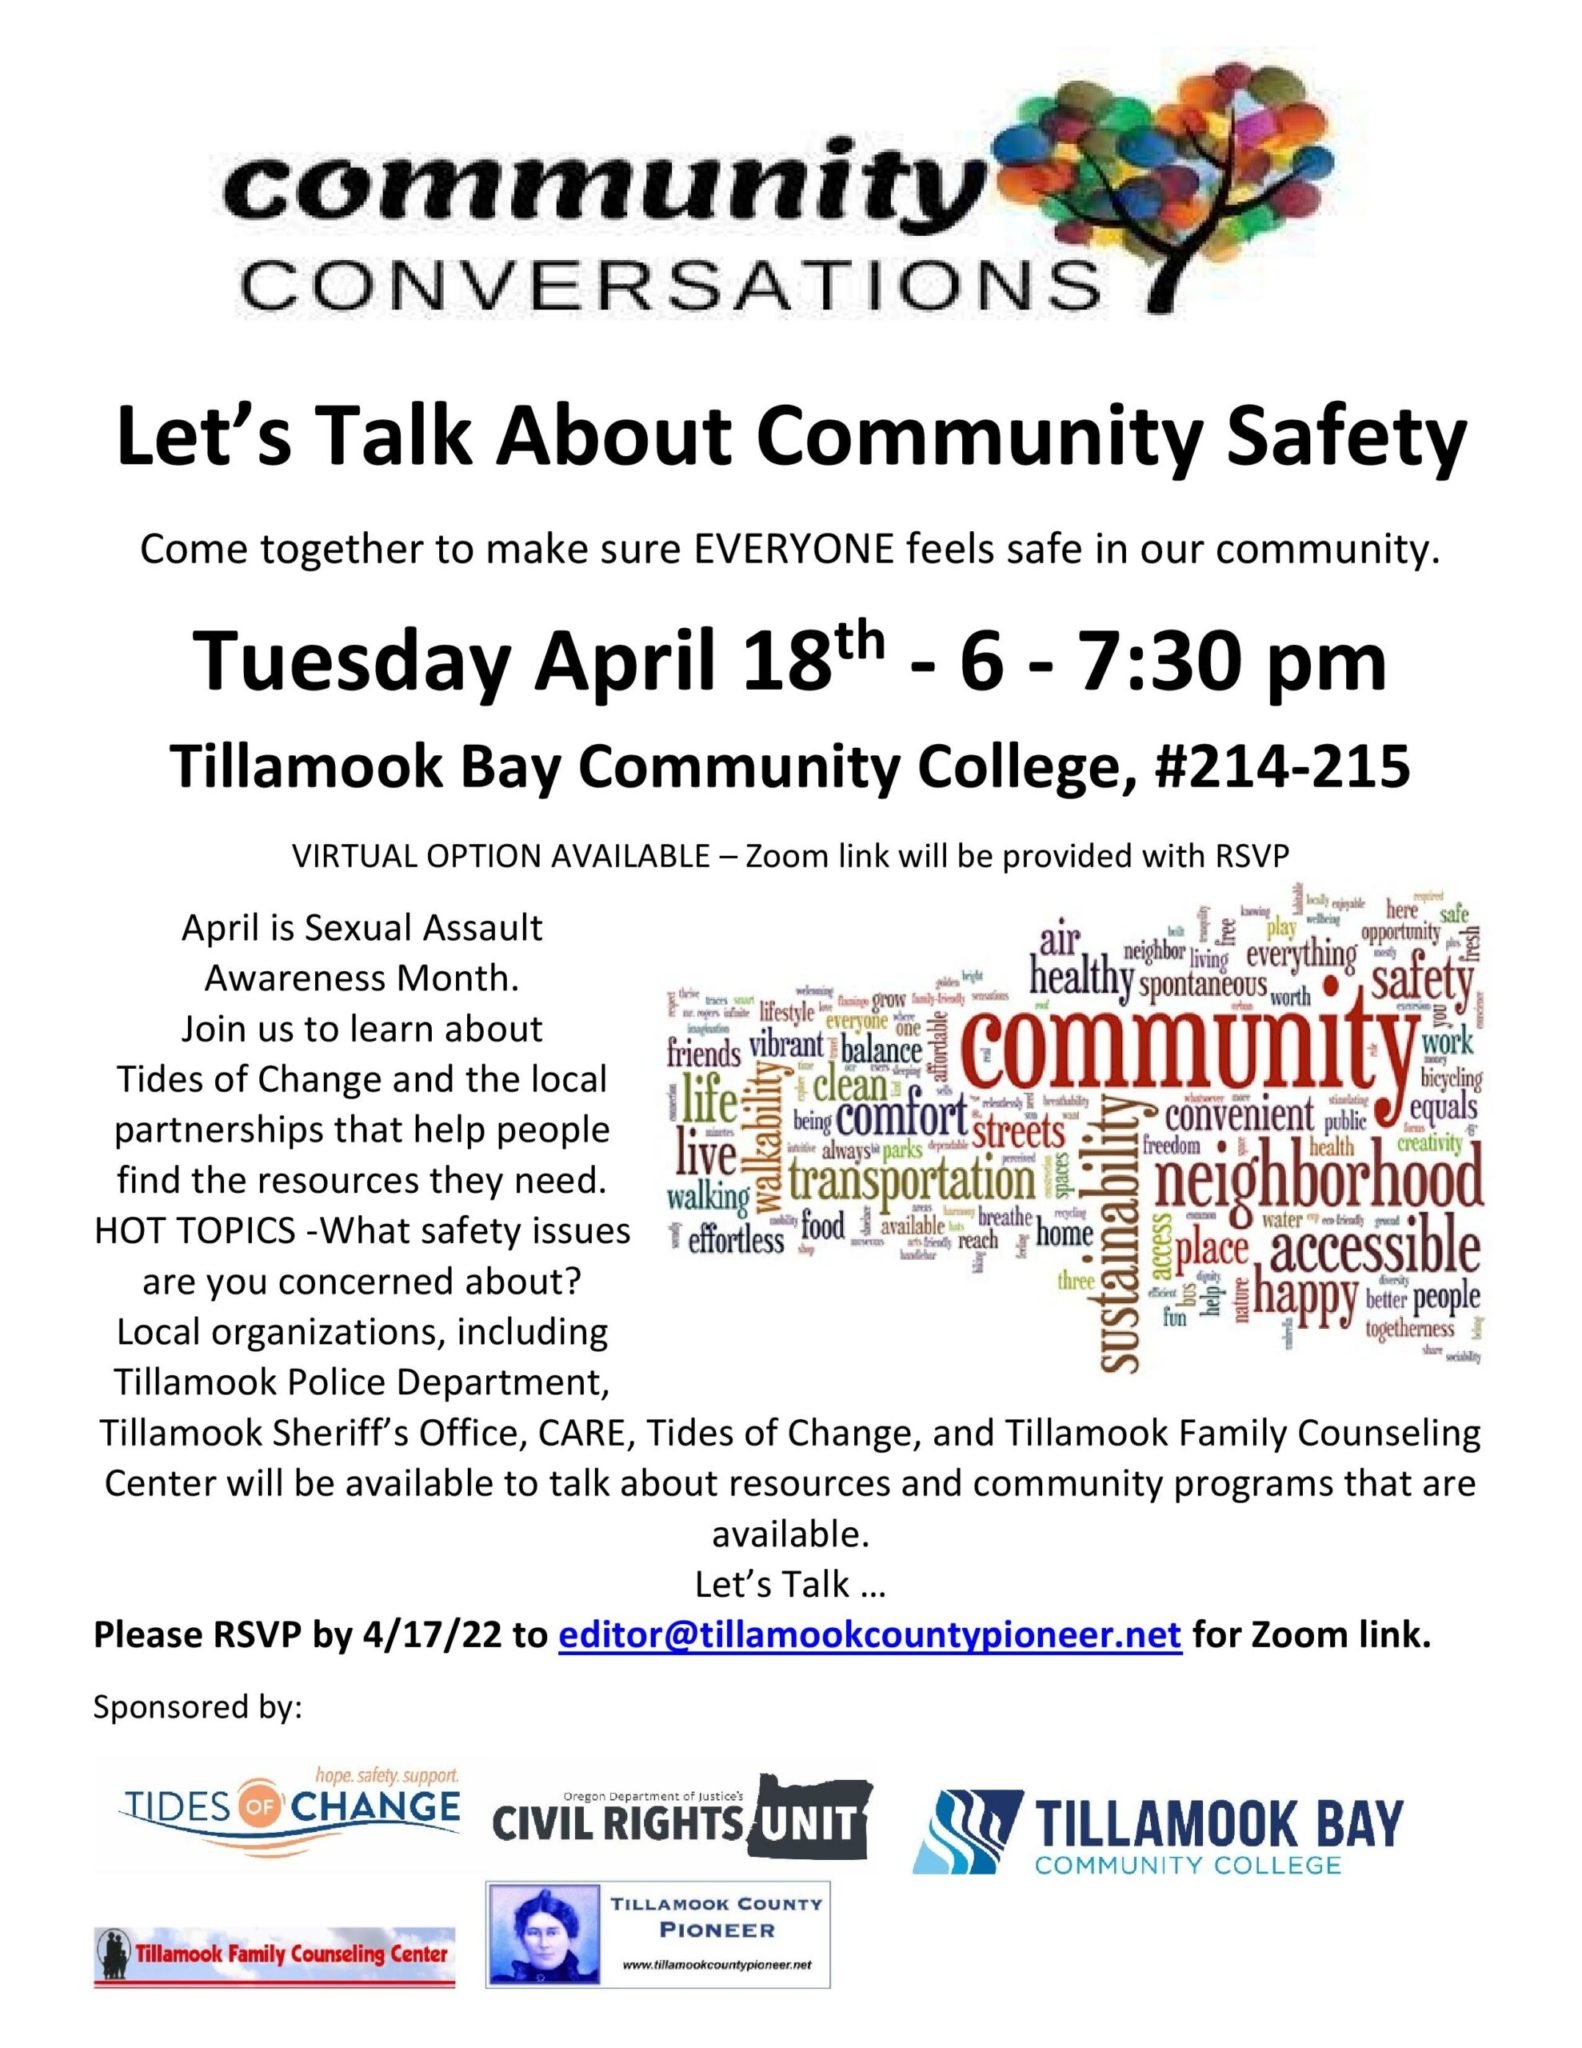 Community ConversationLetsTalkaboutCommunitySafety4.18 page 001 1 scaled tH2Tr9.tmp